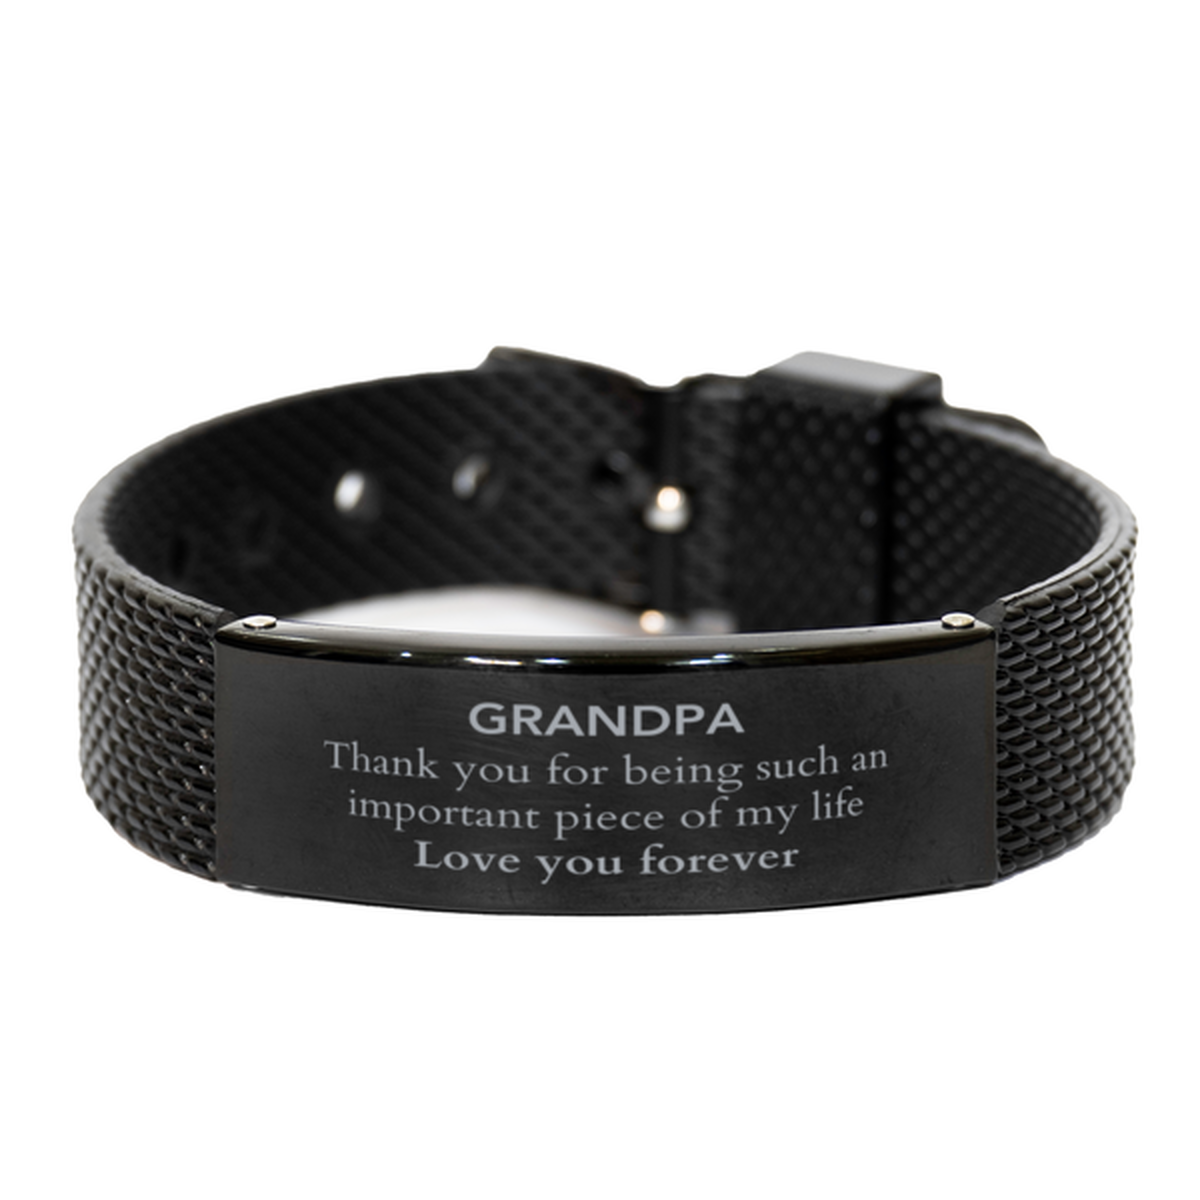 Appropriate Grandpa Black Shark Mesh Bracelet Epic Birthday Gifts for Grandpa Thank you for being such an important piece of my life Grandpa Christmas Mothers Fathers Day